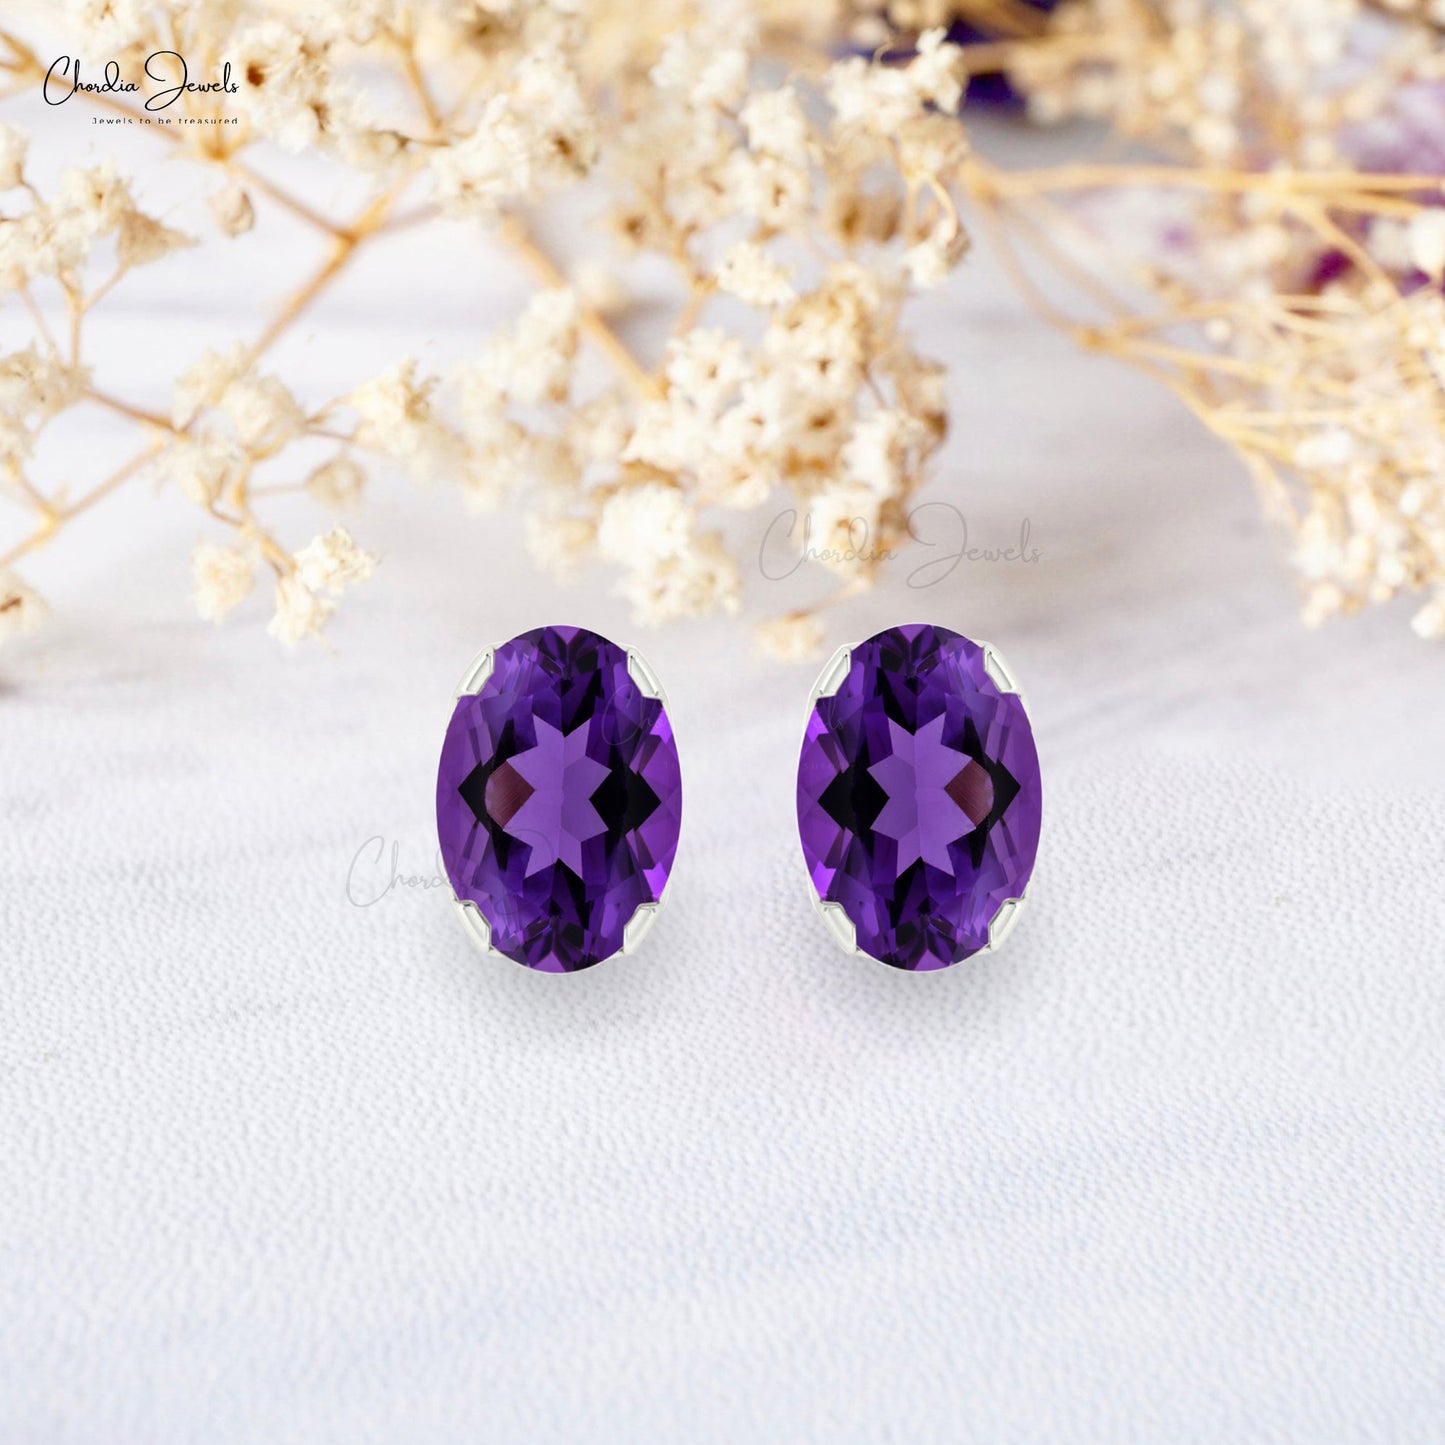 Load image into Gallery viewer, Natural 6x4mm Oval Cut Amethyst Stud Earring
